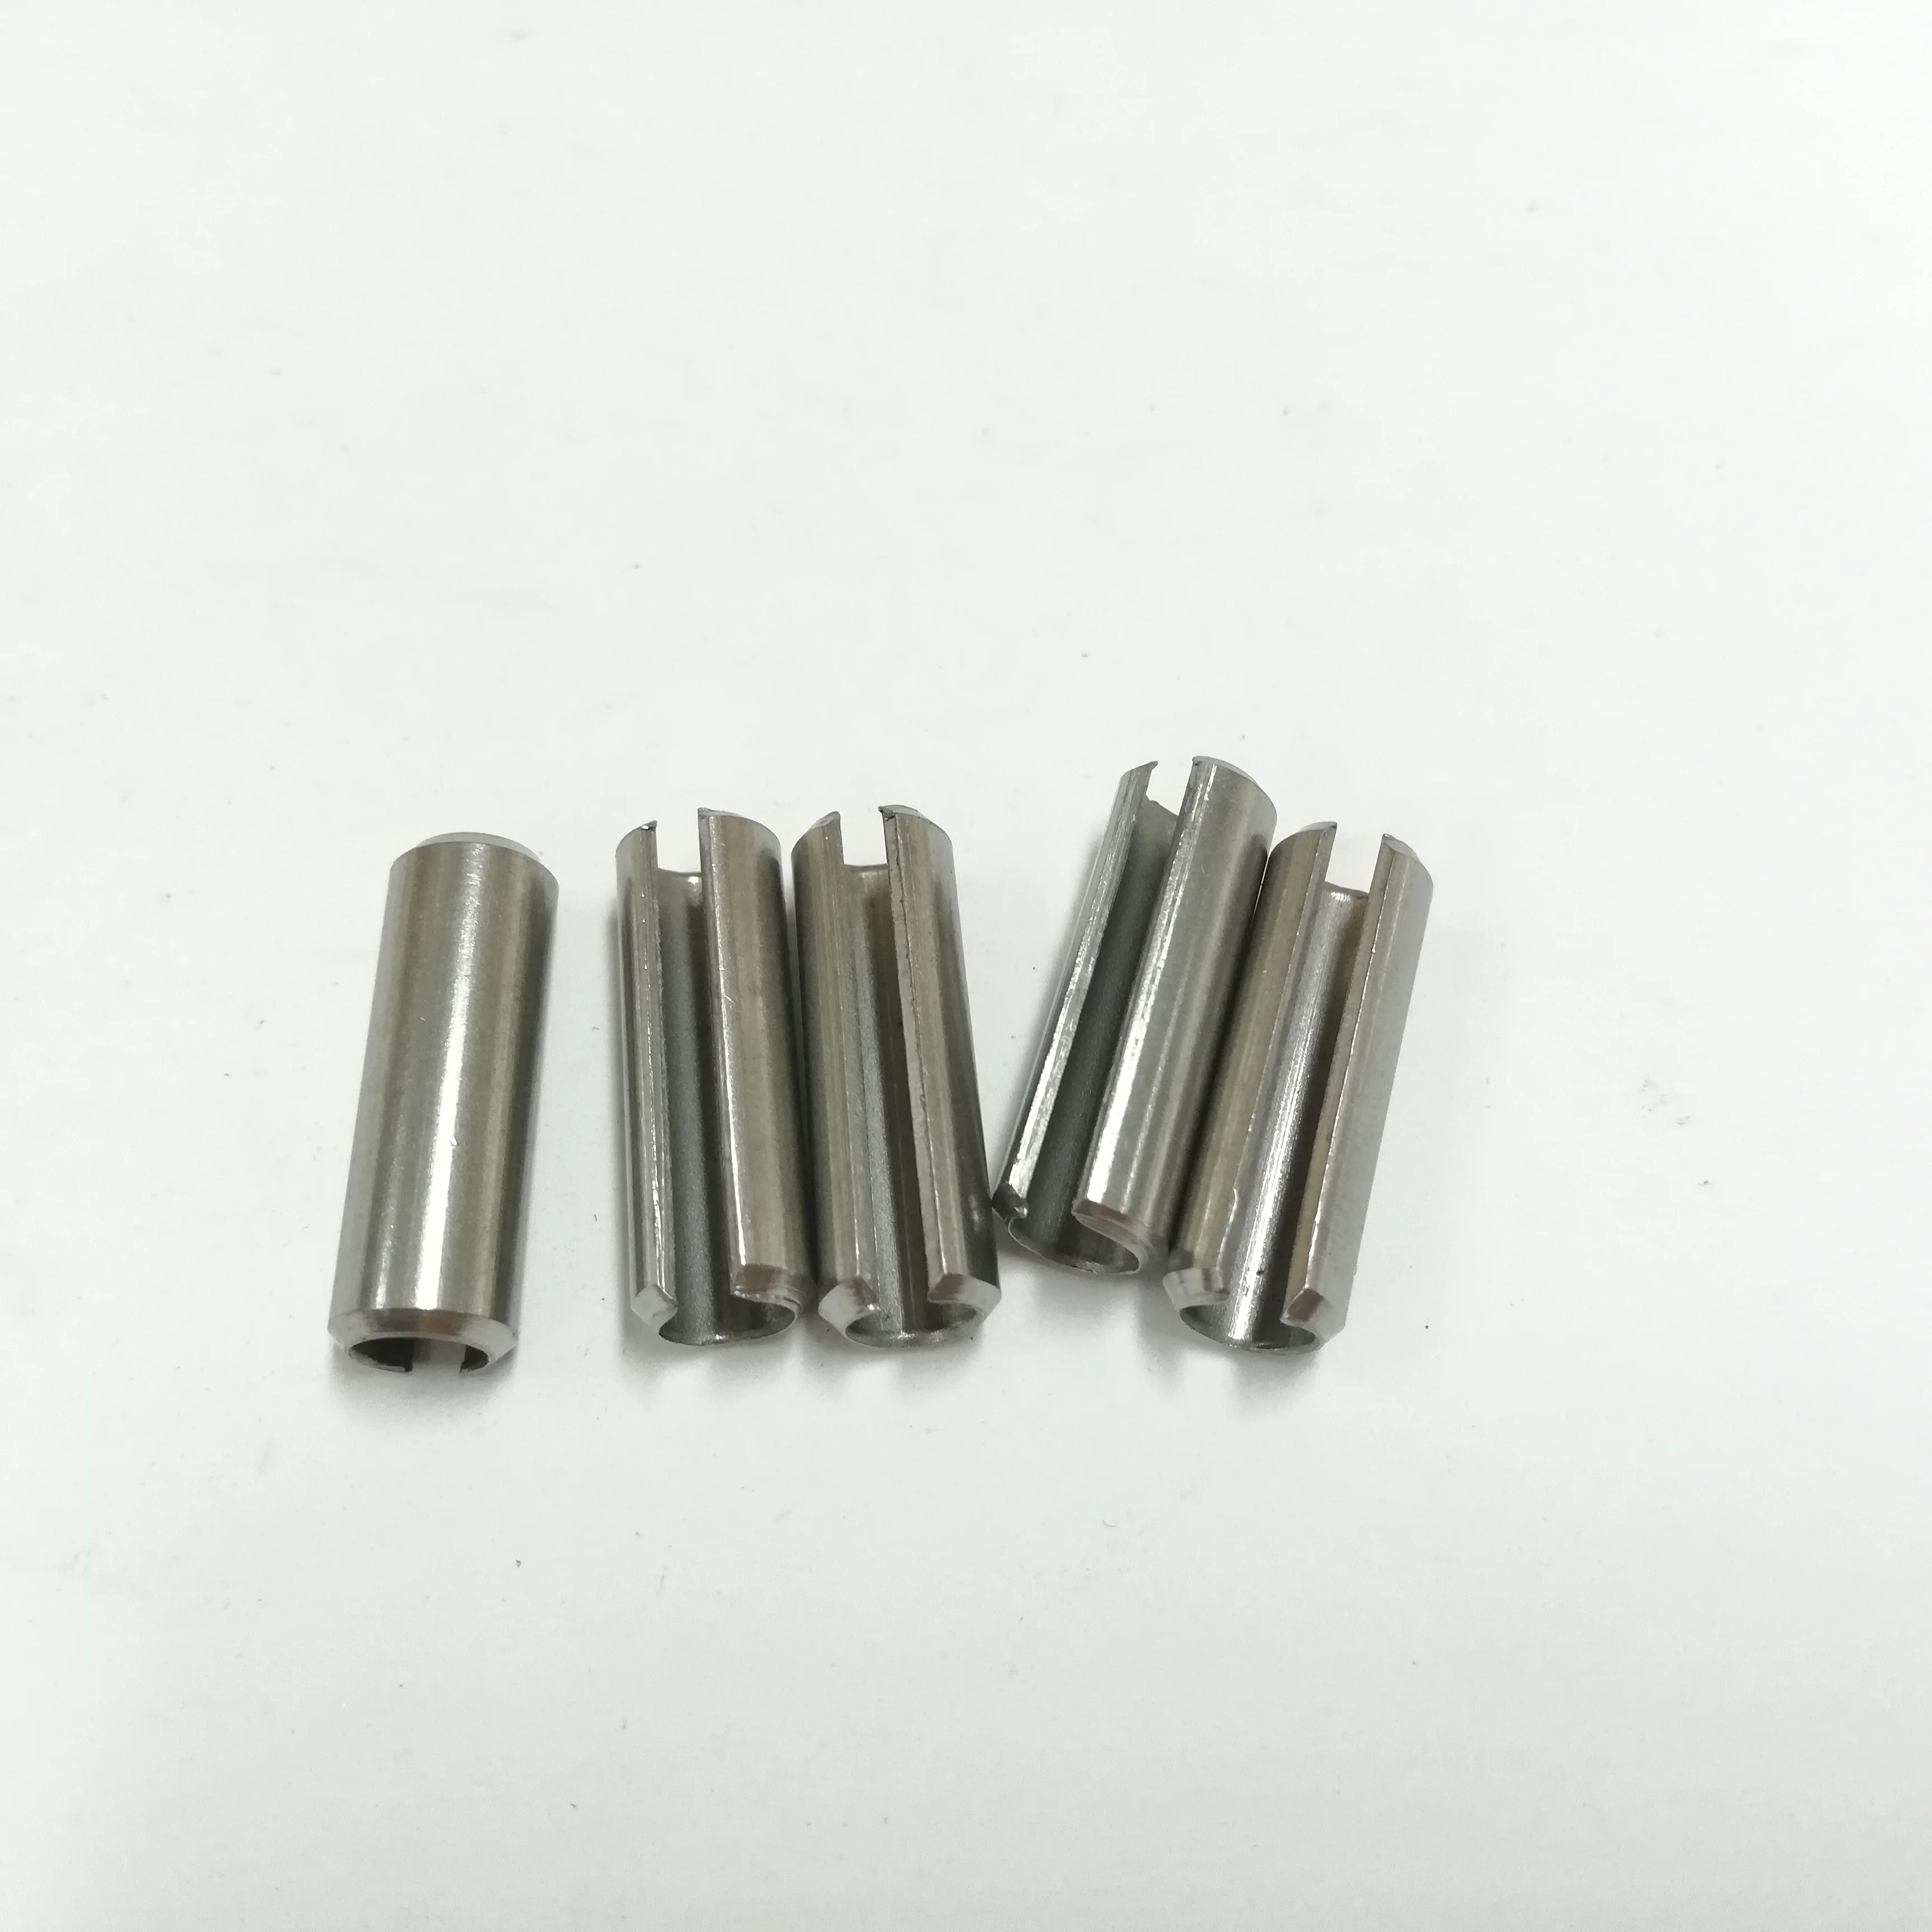 5 Piece Tension Pins/Clamping Sleeves Heavy Version DIN1481 Ø 2 mm Stainless Steel 